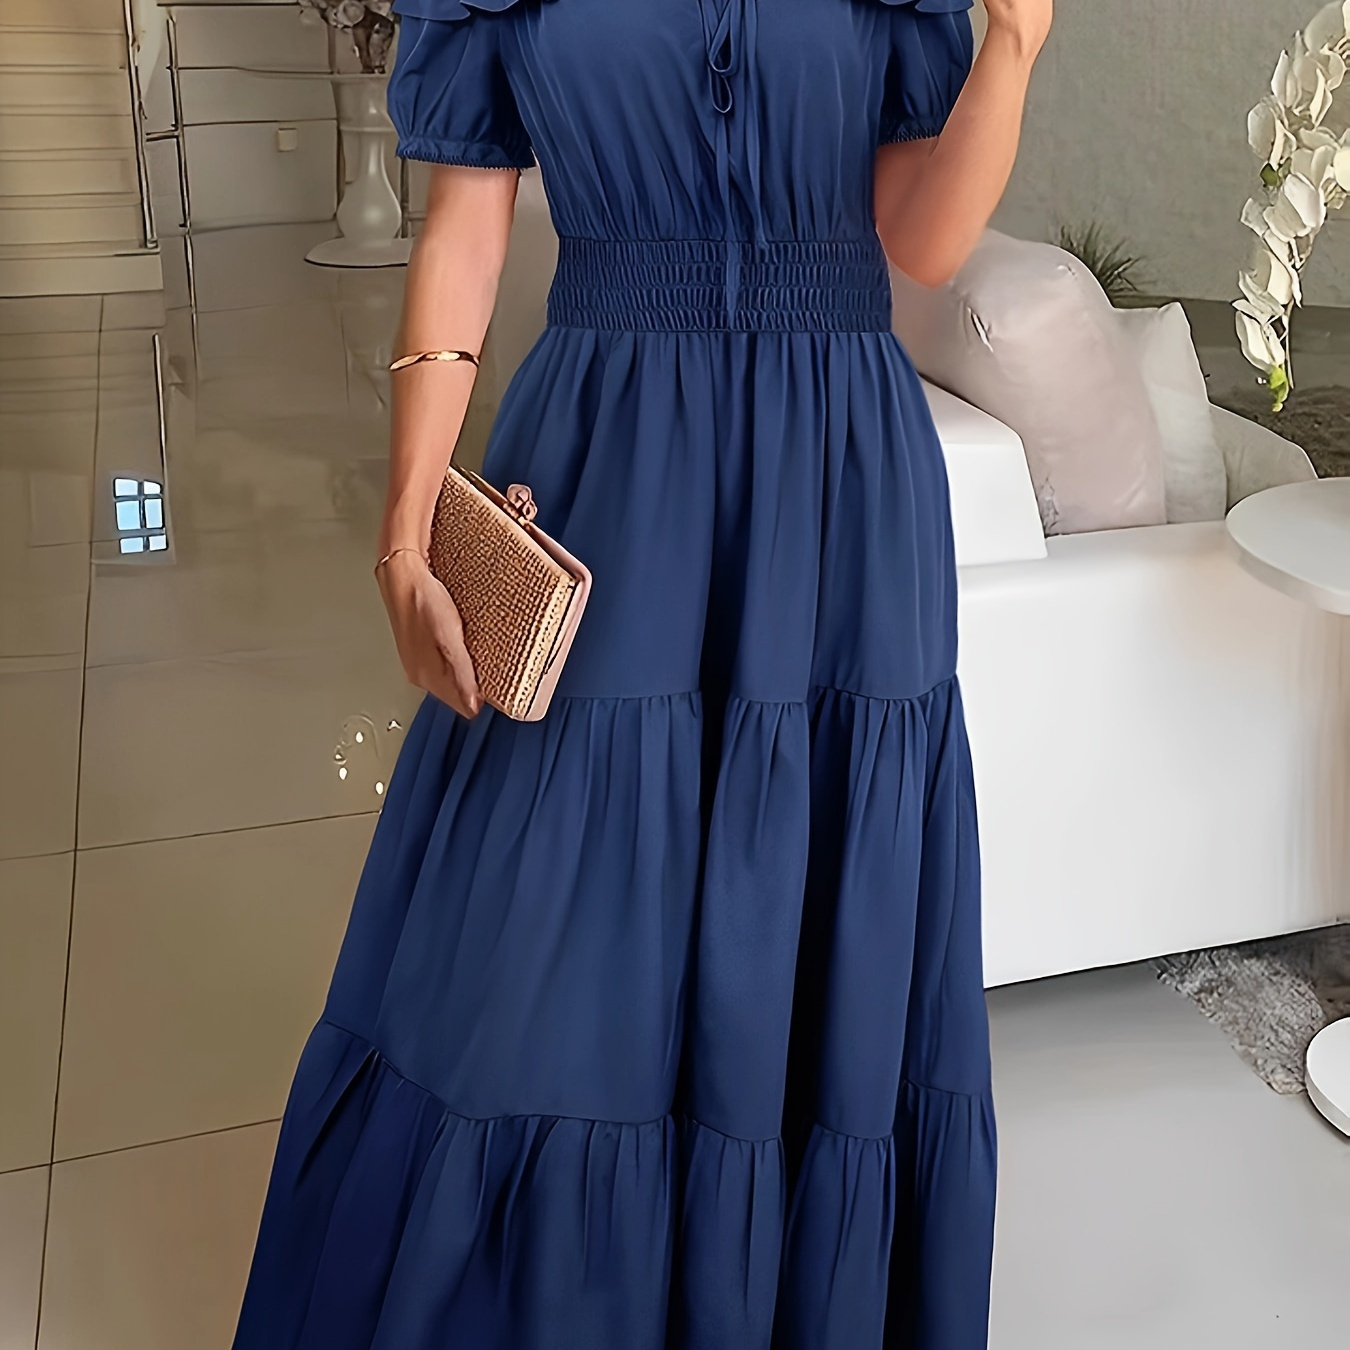 

Ruffle Trim Off-shoulder Tied Dress, Casual Short Sleeve A-line Tiered Dress For Spring & Summer, Women's Clothing Wedding Graduation Engagement Occasion Ceremony Party Holiday Vacation Birthday